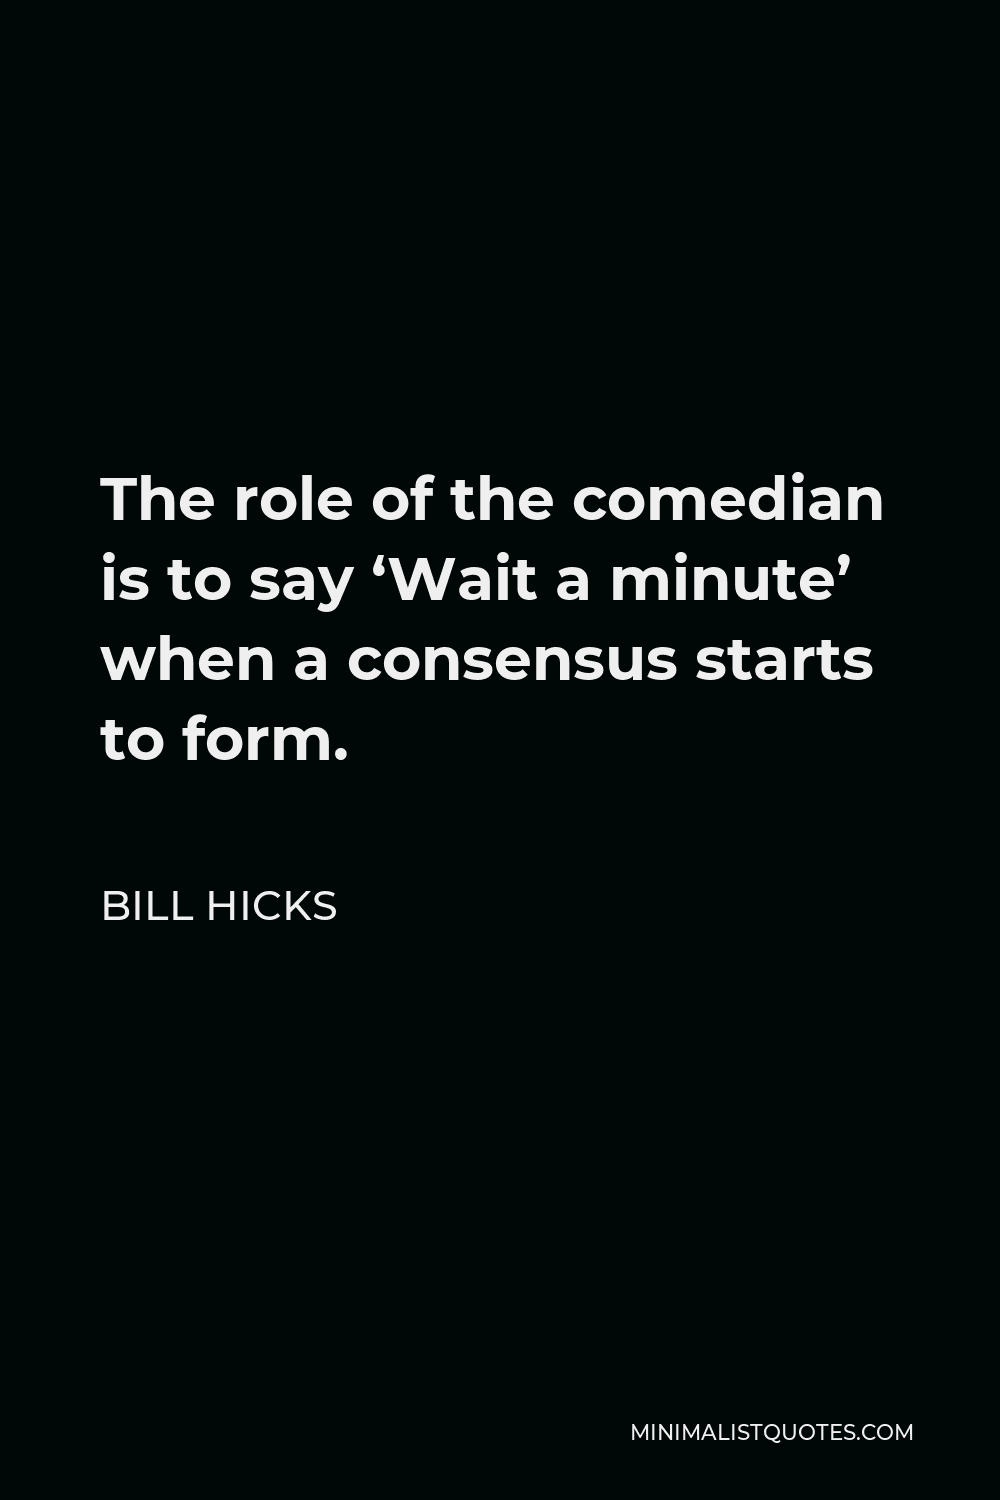 Bill Hicks Quote - The role of the comedian is to say ‘Wait a minute’ when a consensus starts to form.